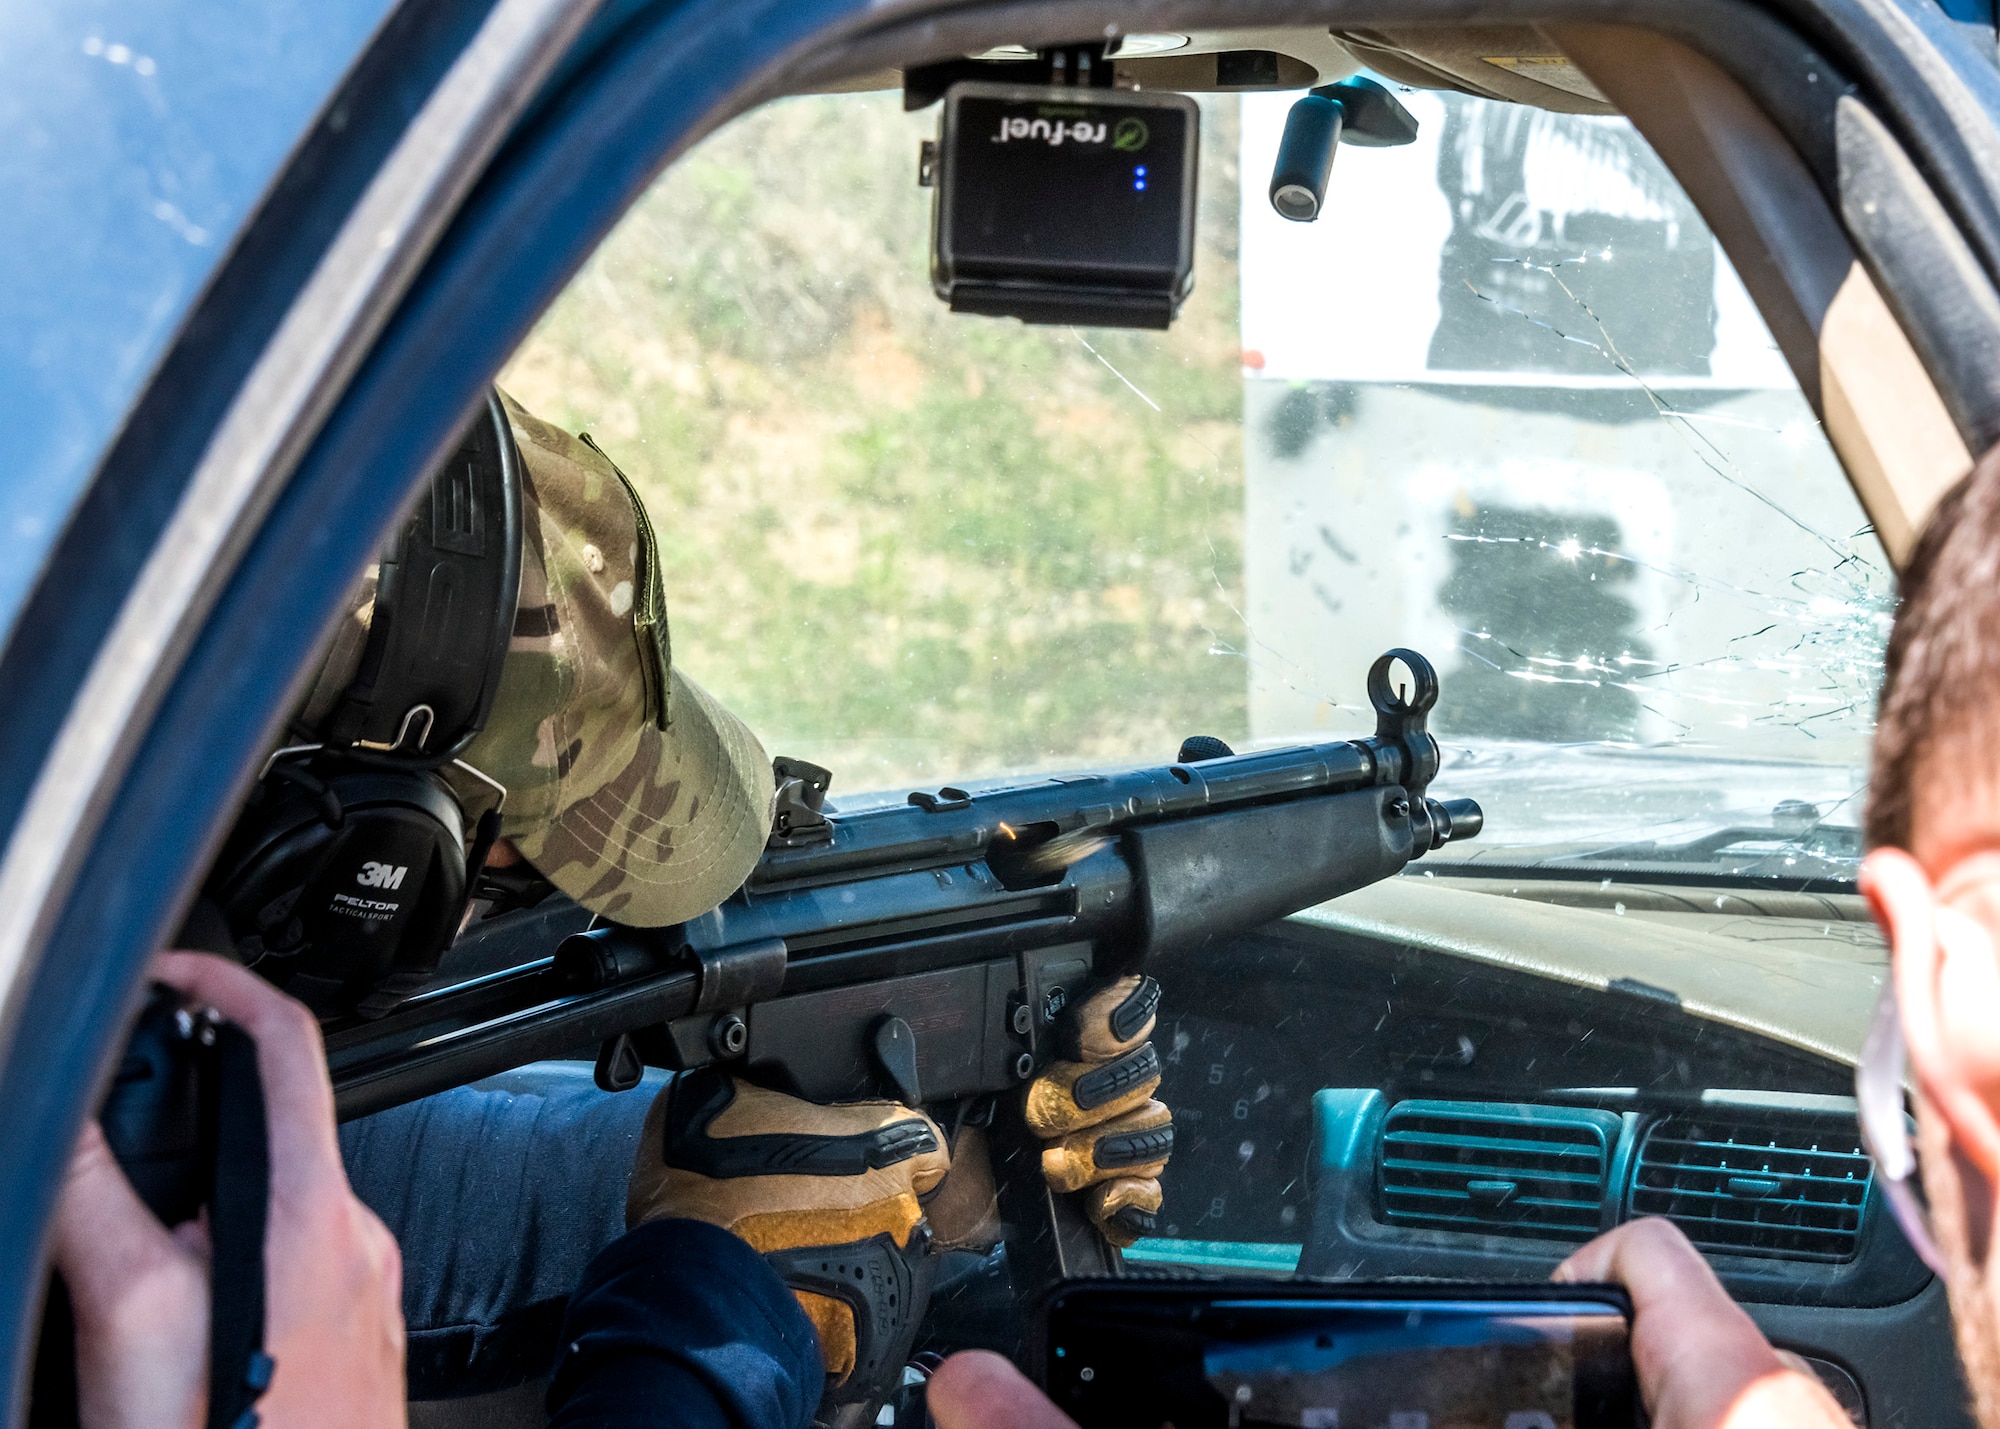 A participant fires an MP-5 from inside a vehicle during the weapons familiarization training of the Senior Leader Security Seminar at Montross, Va., April 30, 2018. The unique two-day anti-terrorism course ensures the safety and survivability of Air Force leaders traveling in medium to critical threat areas. (U.S. Air Force photo by Michael Hastings)